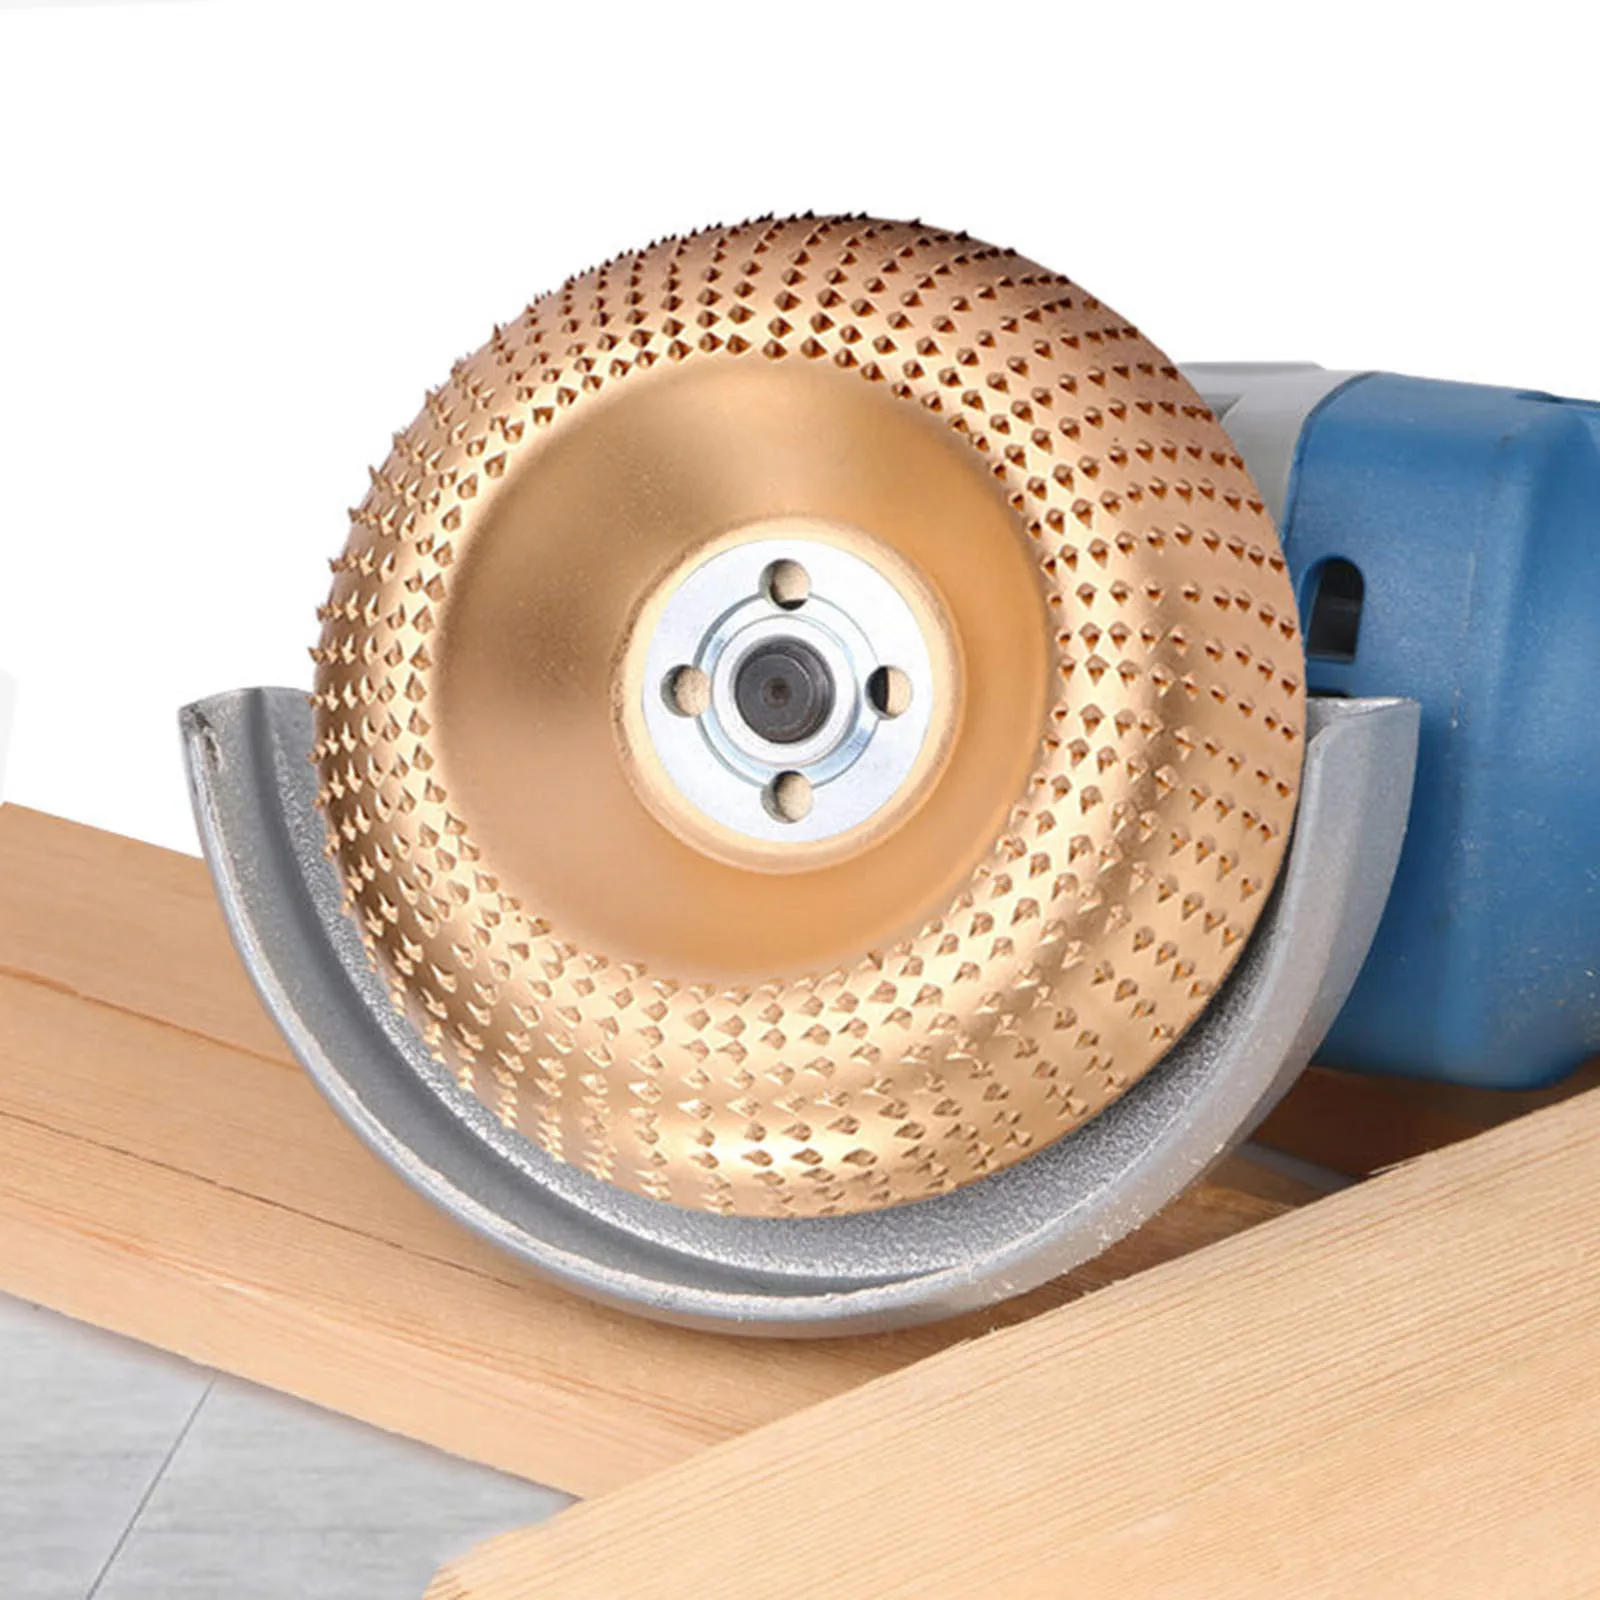 

125mm Wood Angle Grinding Wheel Abrasive Disc Angle Grinder Tungsten Carbide Coating Bore Shaping Sanding Carving Rotary Tool